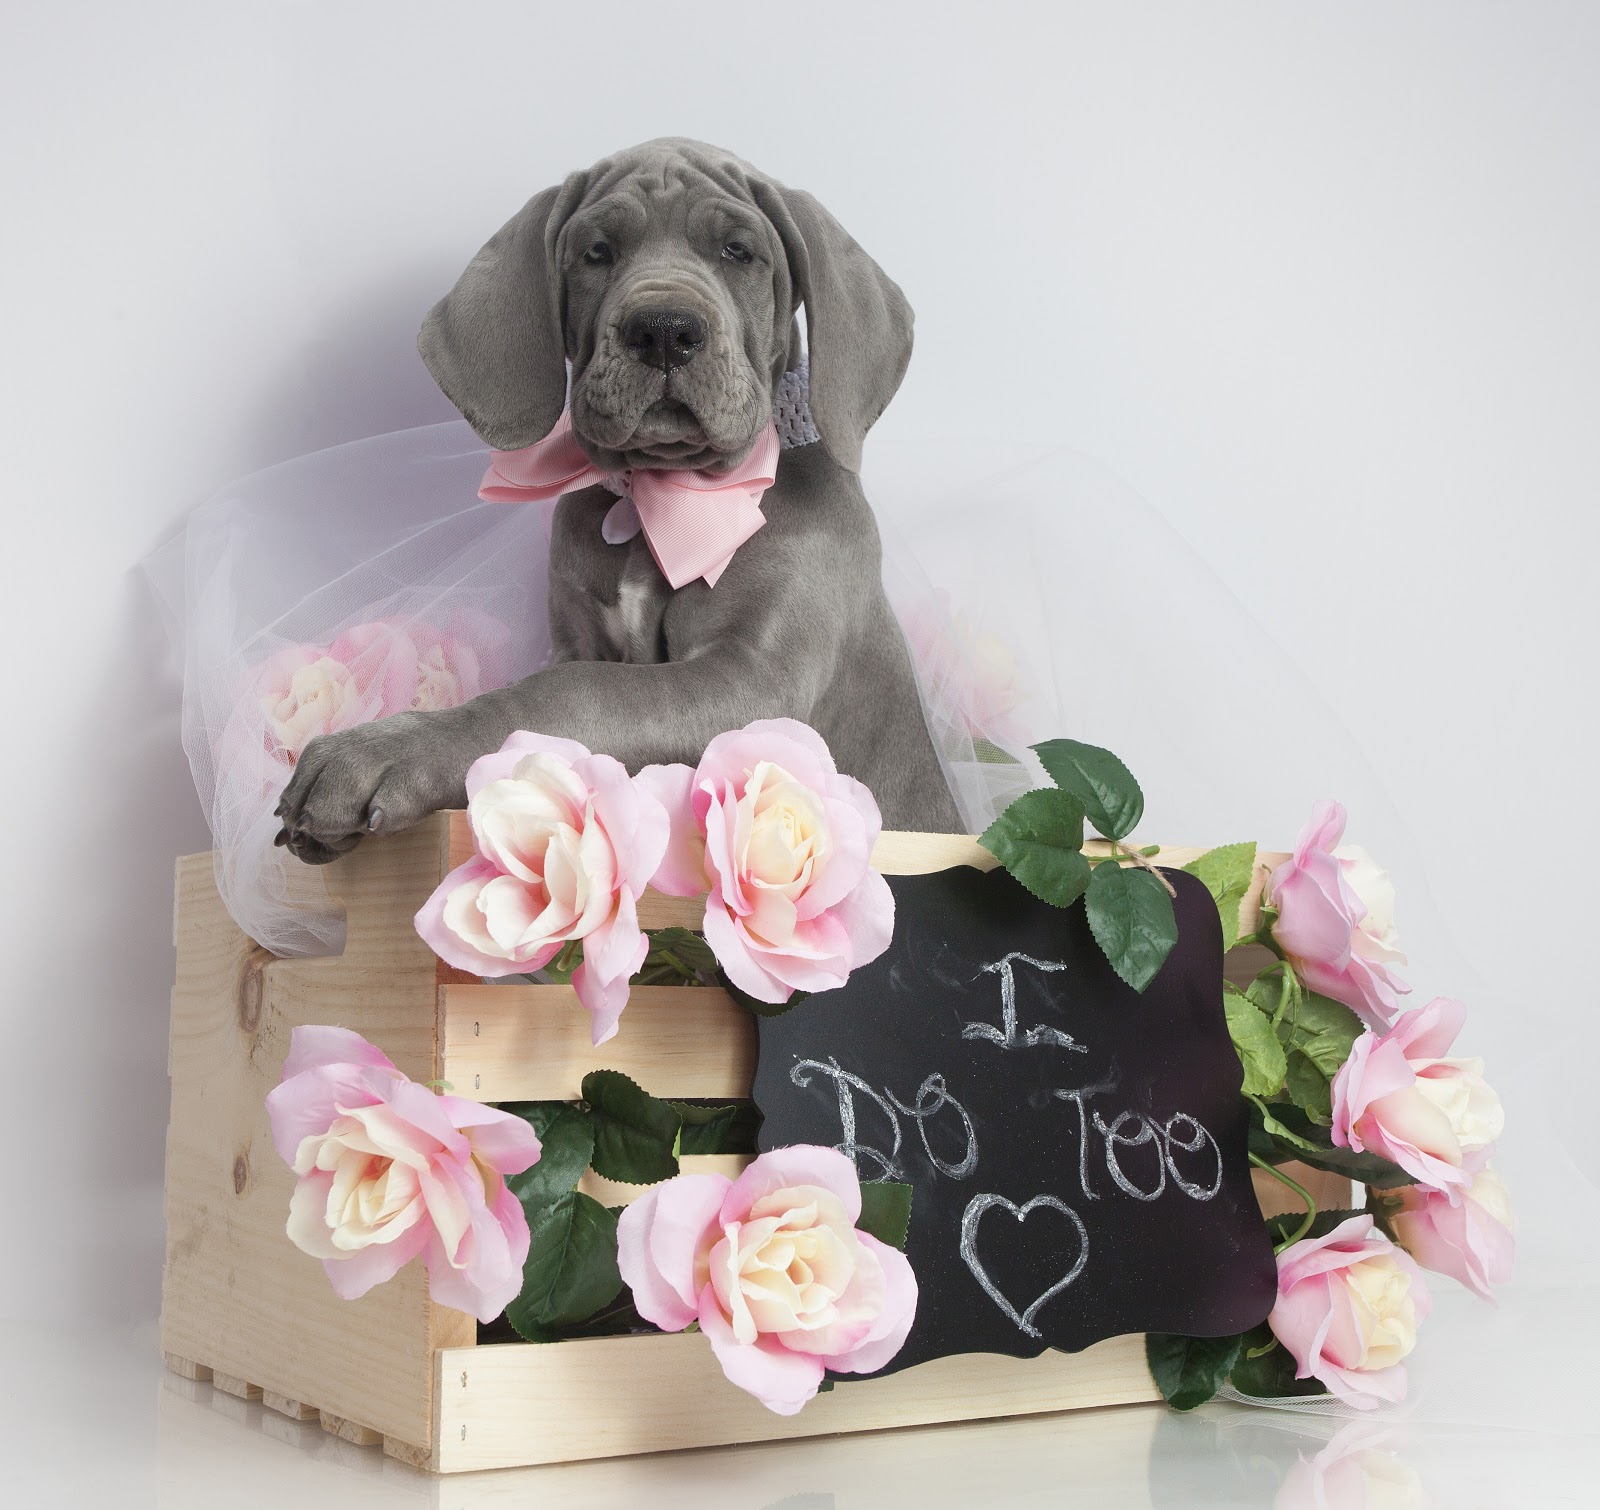 A grey dog, with a pink bow, sat in a wooden crate surrounded by pink flowers and a blackboard with the words "I do too" written